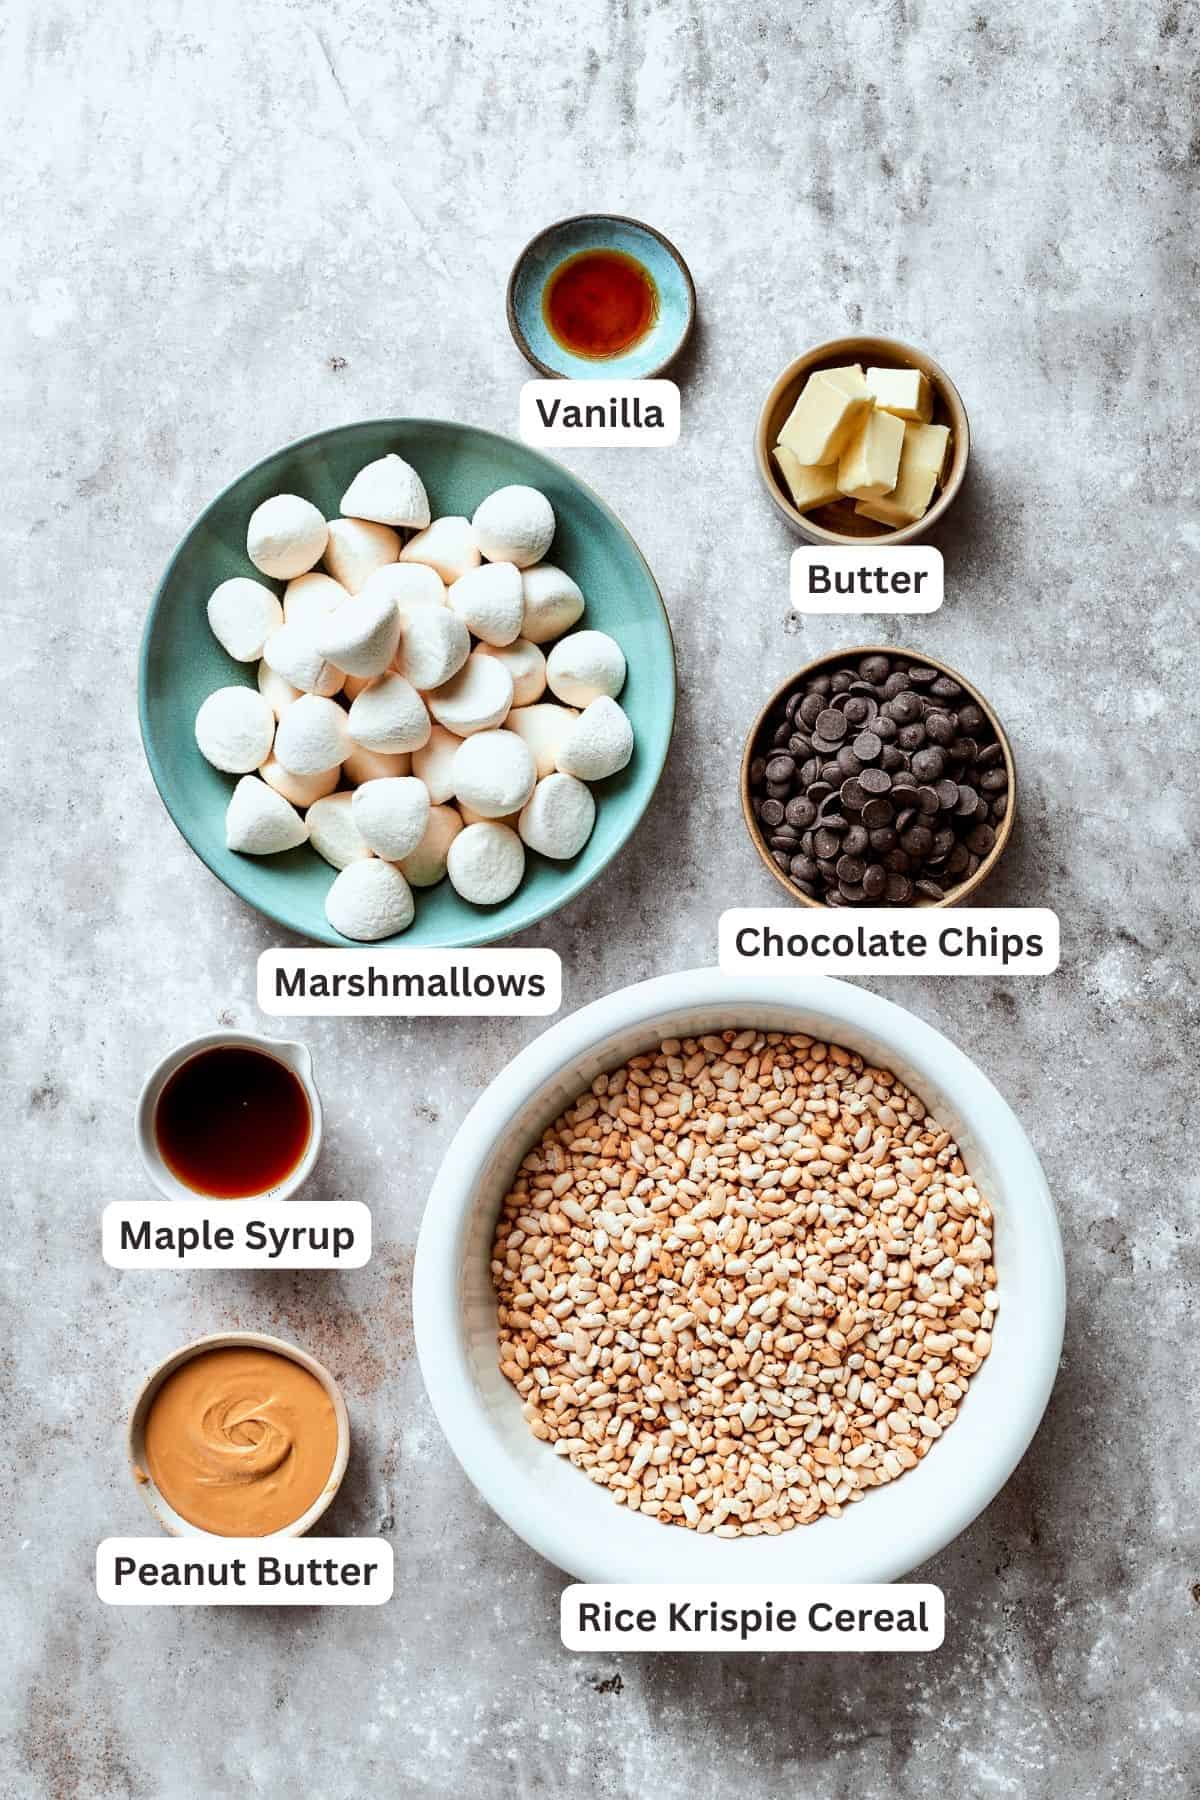 Ingredients for peanut butter rice crispy treats are portioned and labelled: mini marshmallows, chocolate chips, butter, maple syrup, peanut butter vanilla, rice cereal.